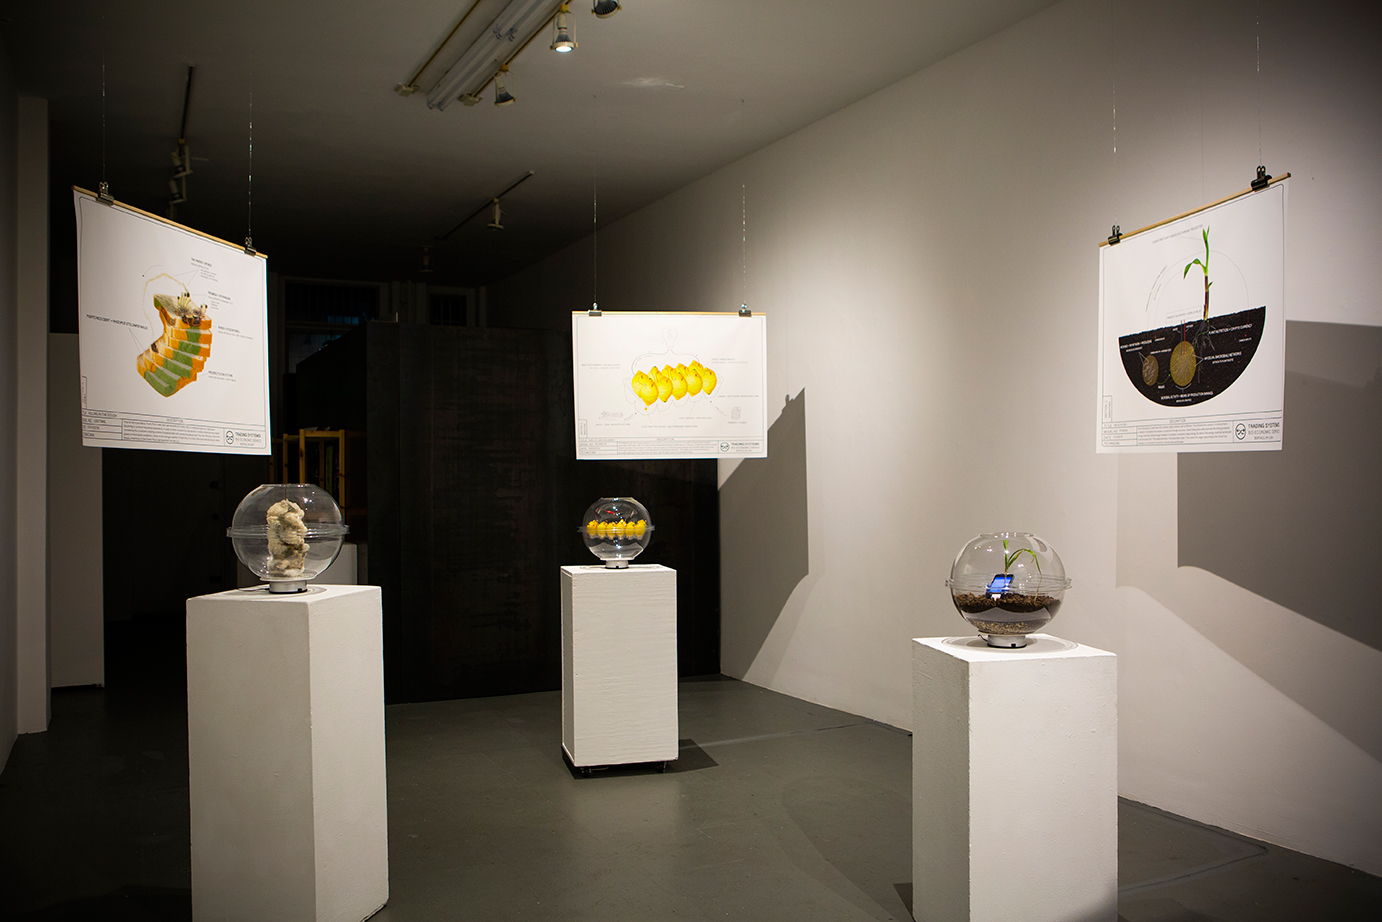 Interior image of exhibition – please note the plastic orbs spin on the pedestals